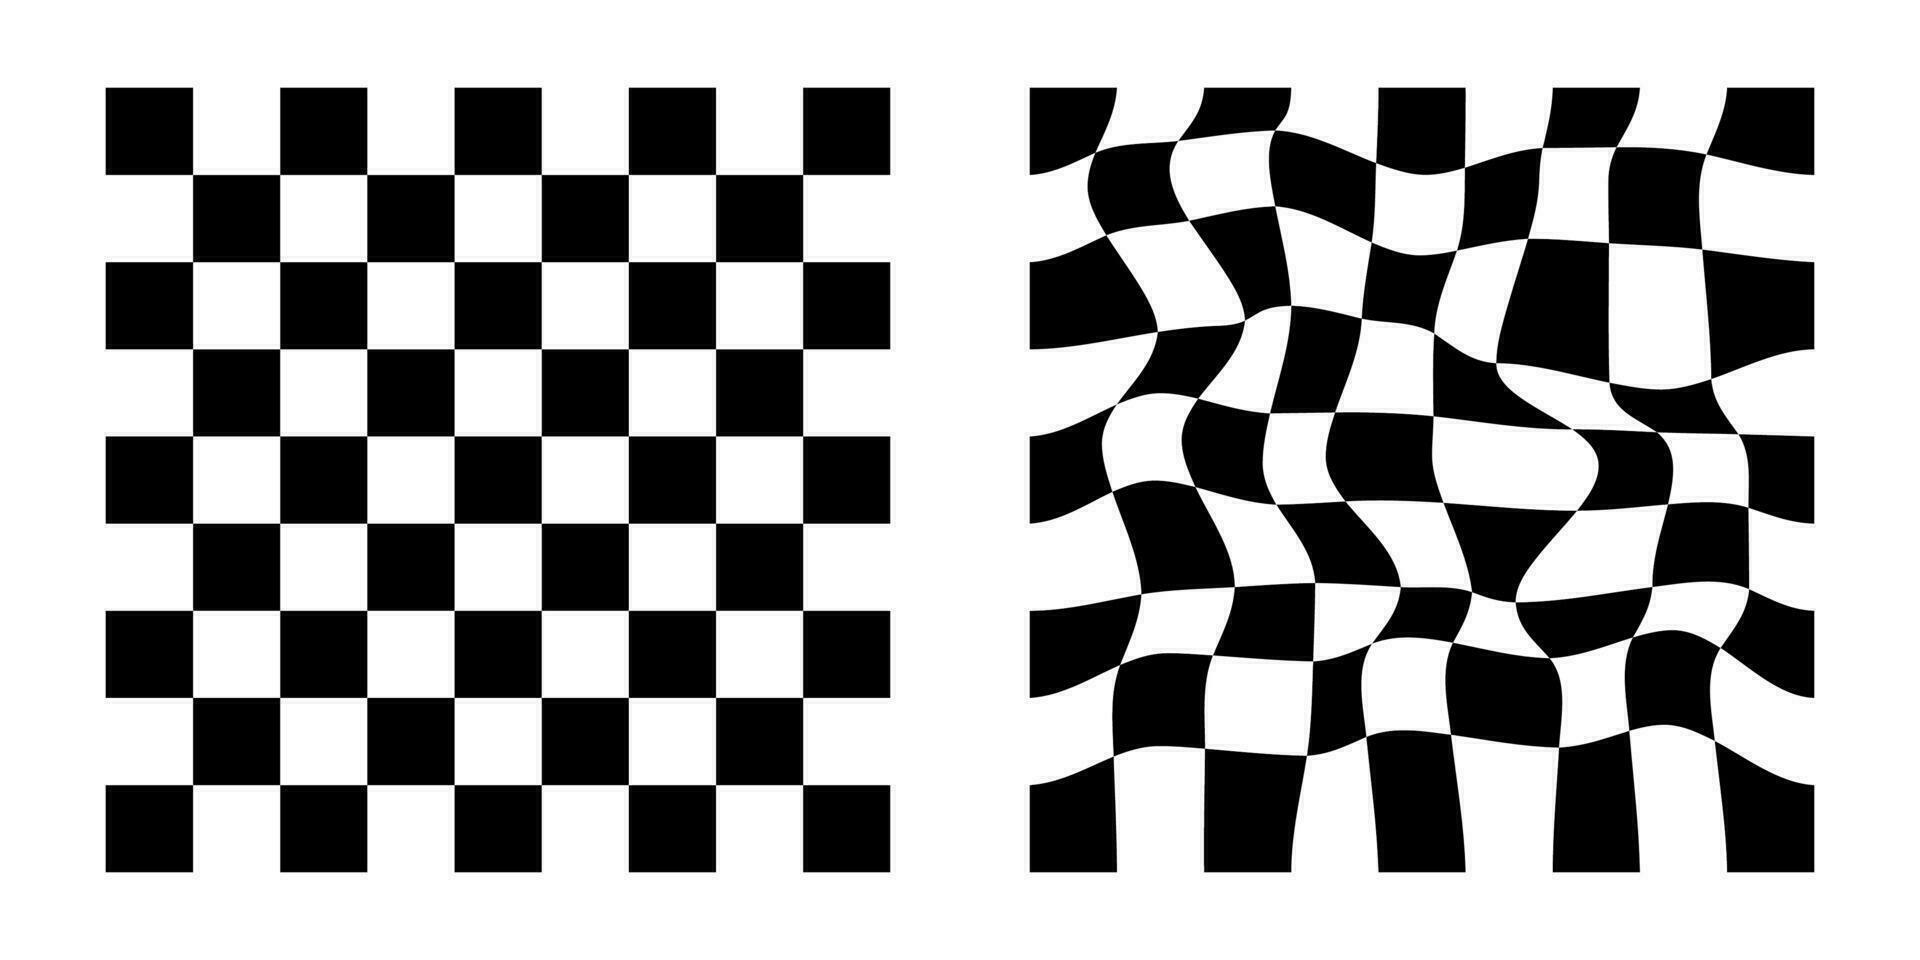 Distorted checkered pattern black and white background design vector illustration.